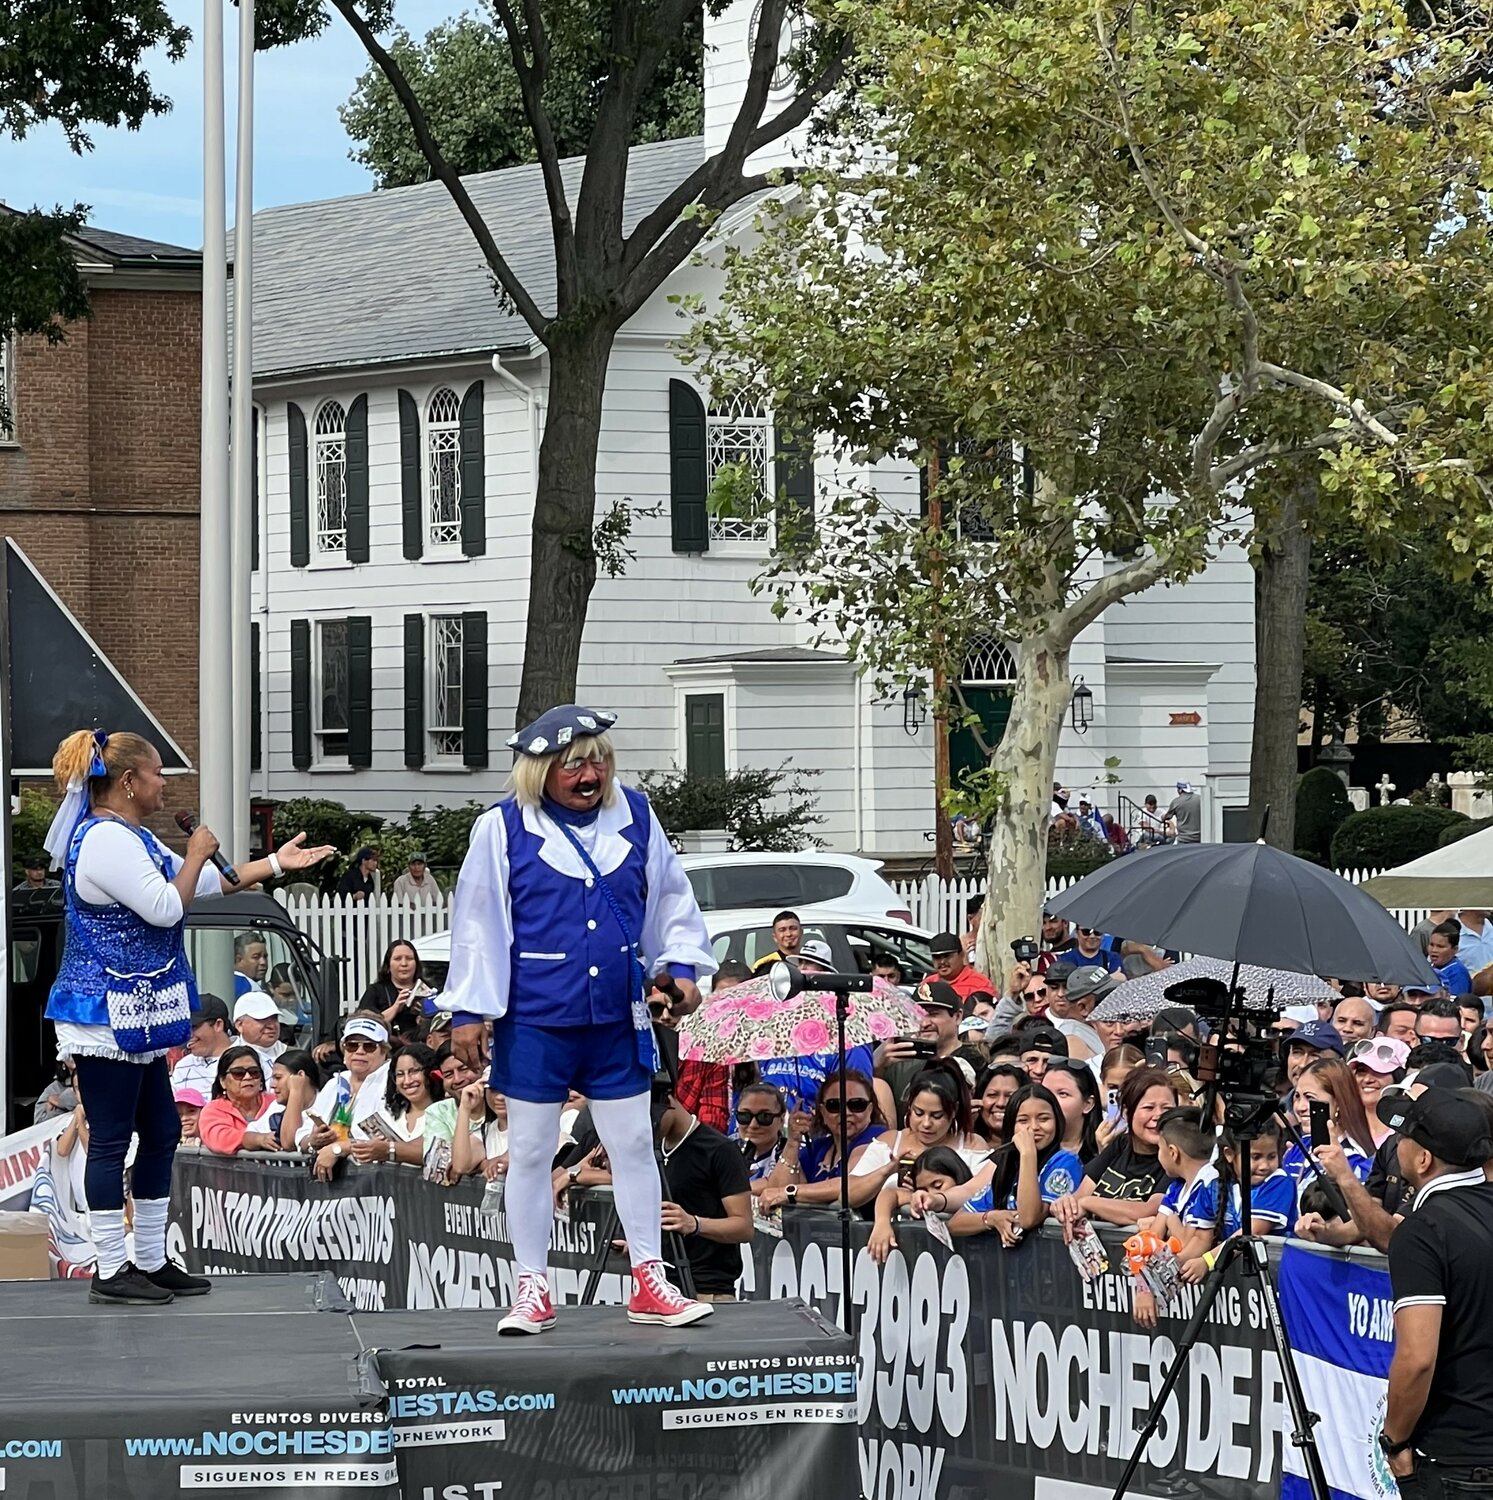 The popular Salvadoran clown Pizarrín and his associate sent laughter rippling through an audience of several thousand. Some attendees watched from comfortable seats just across Front Street on the steps of historic St. George’s Episcopal Church.